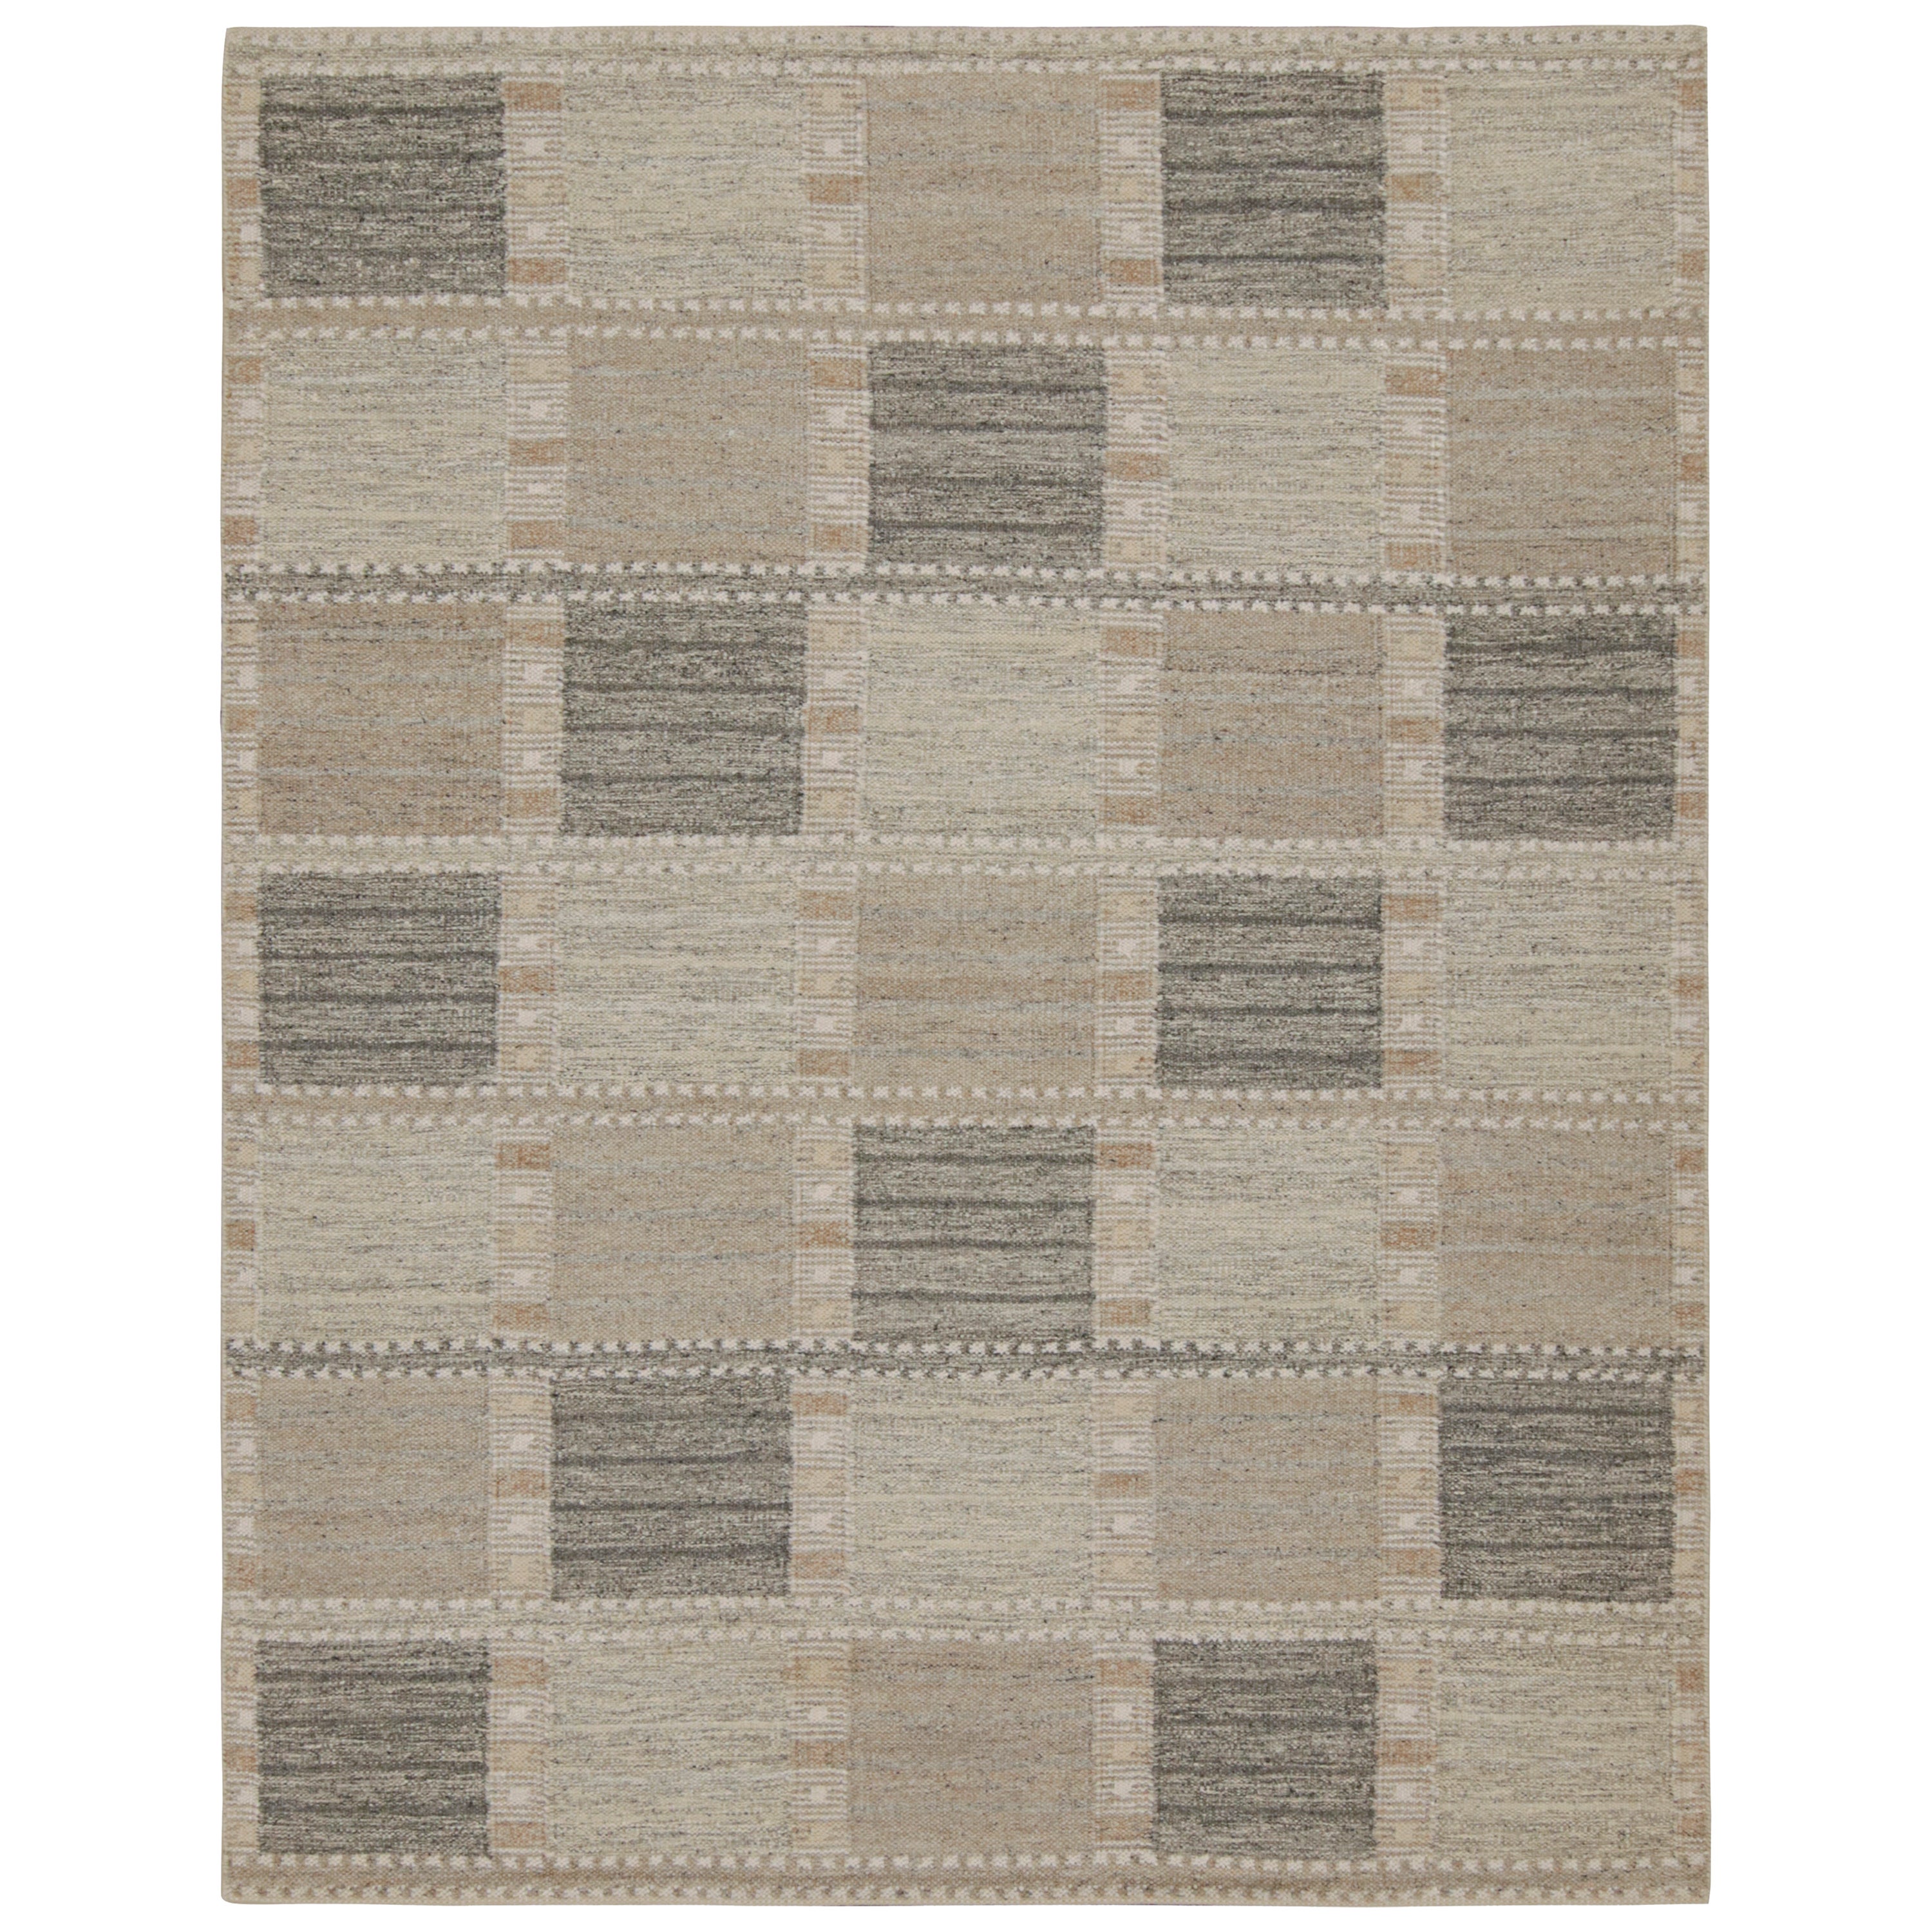 Rug & Kilim’s Scandinavian Style Kilim Rug in Beige and Gray Geometric Patterns For Sale